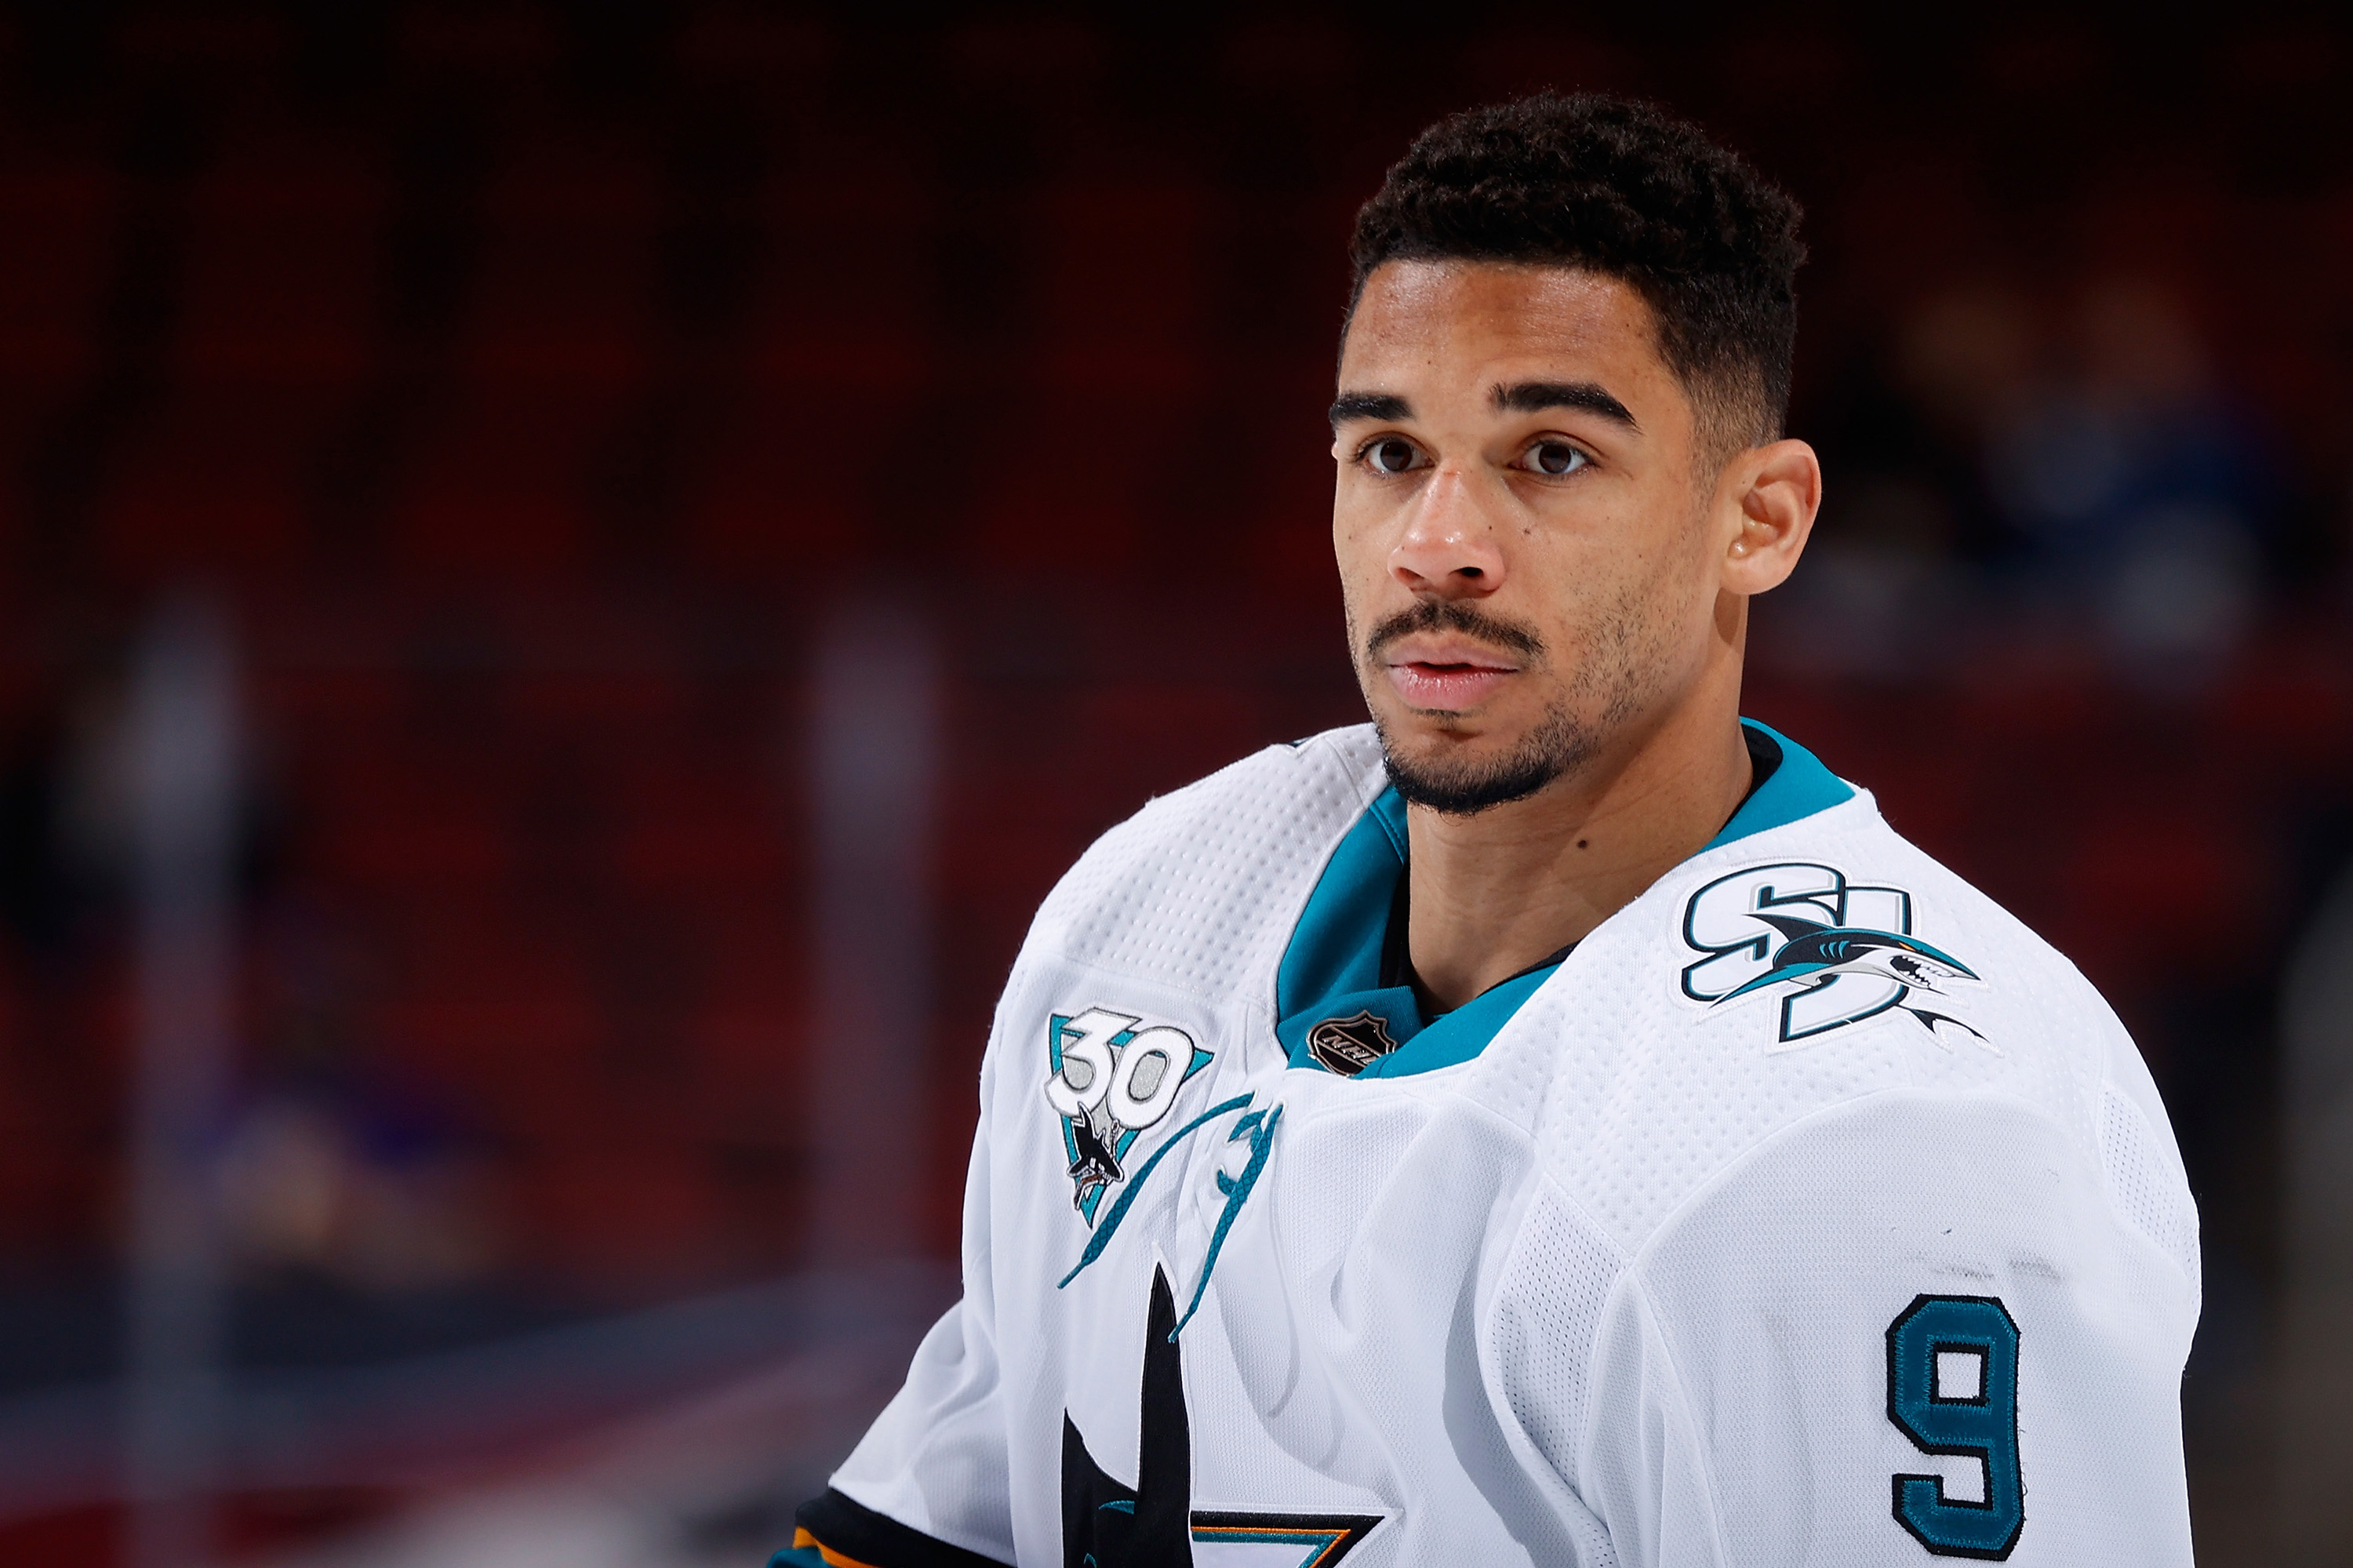 NHL Star Evander Kane Denies Wife's Allegations That He Bet on His Own Games